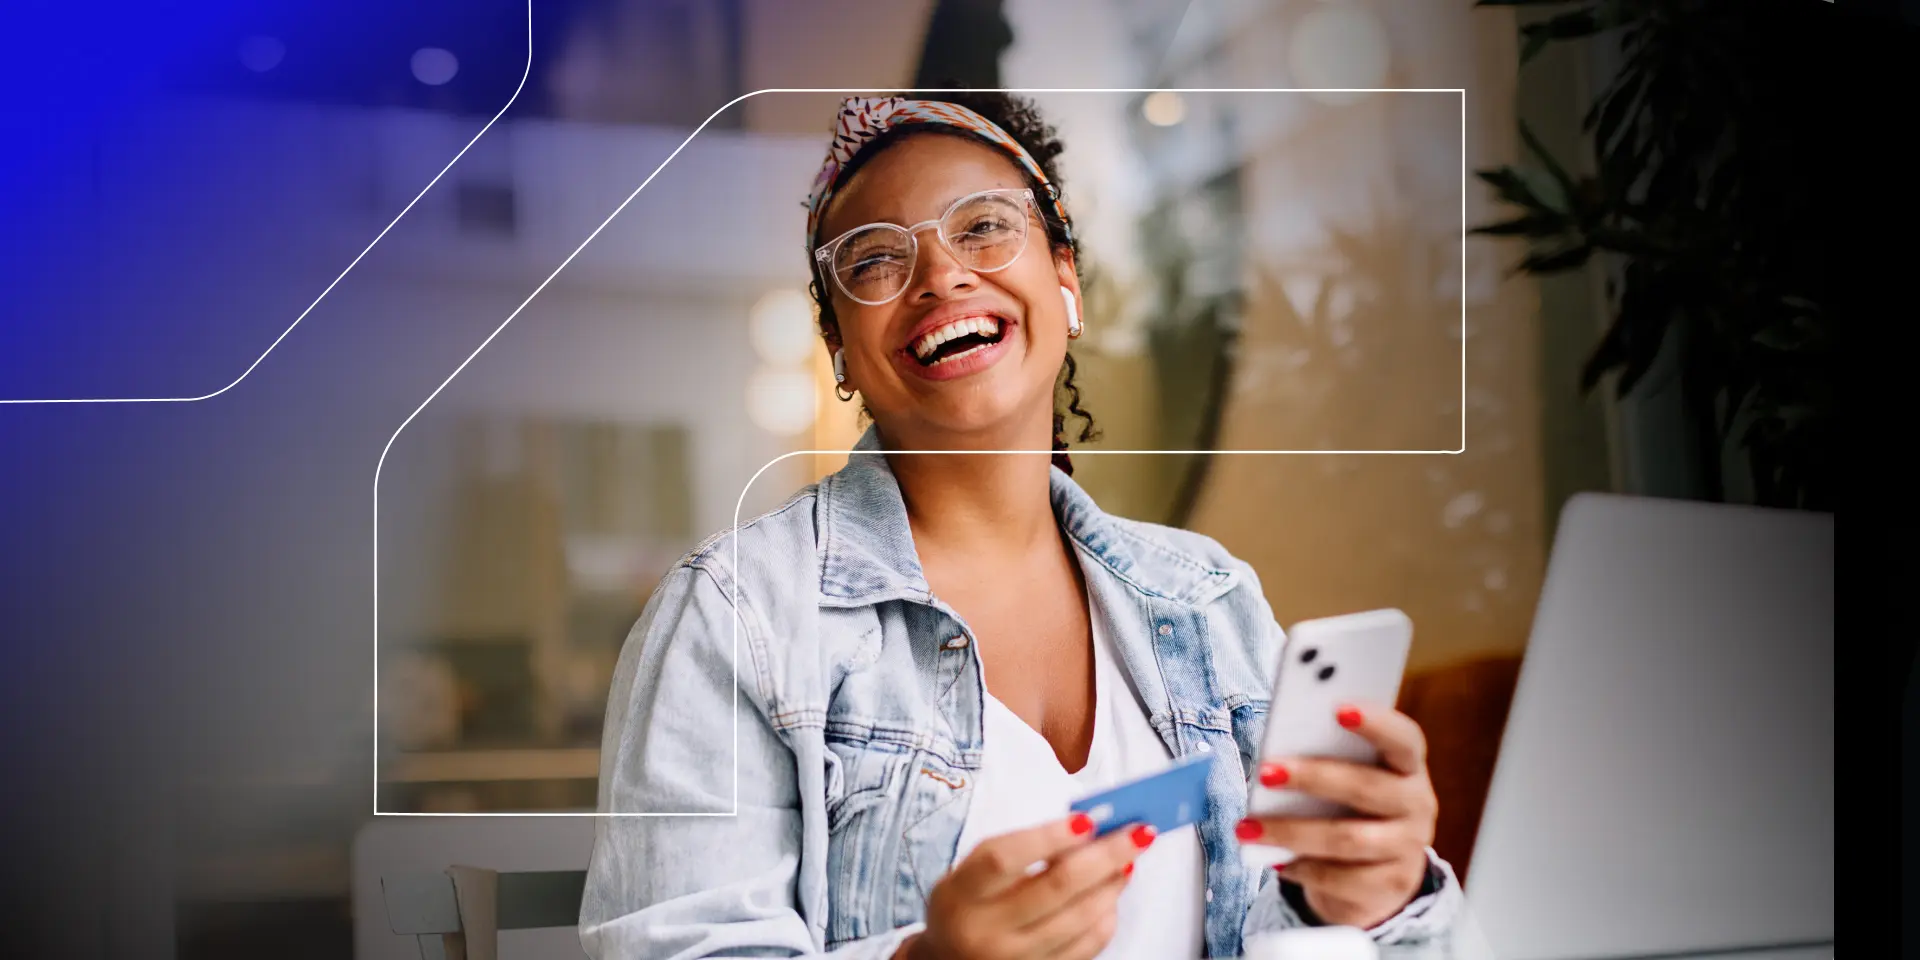 Let your customers connect and purchase from you - digitally!